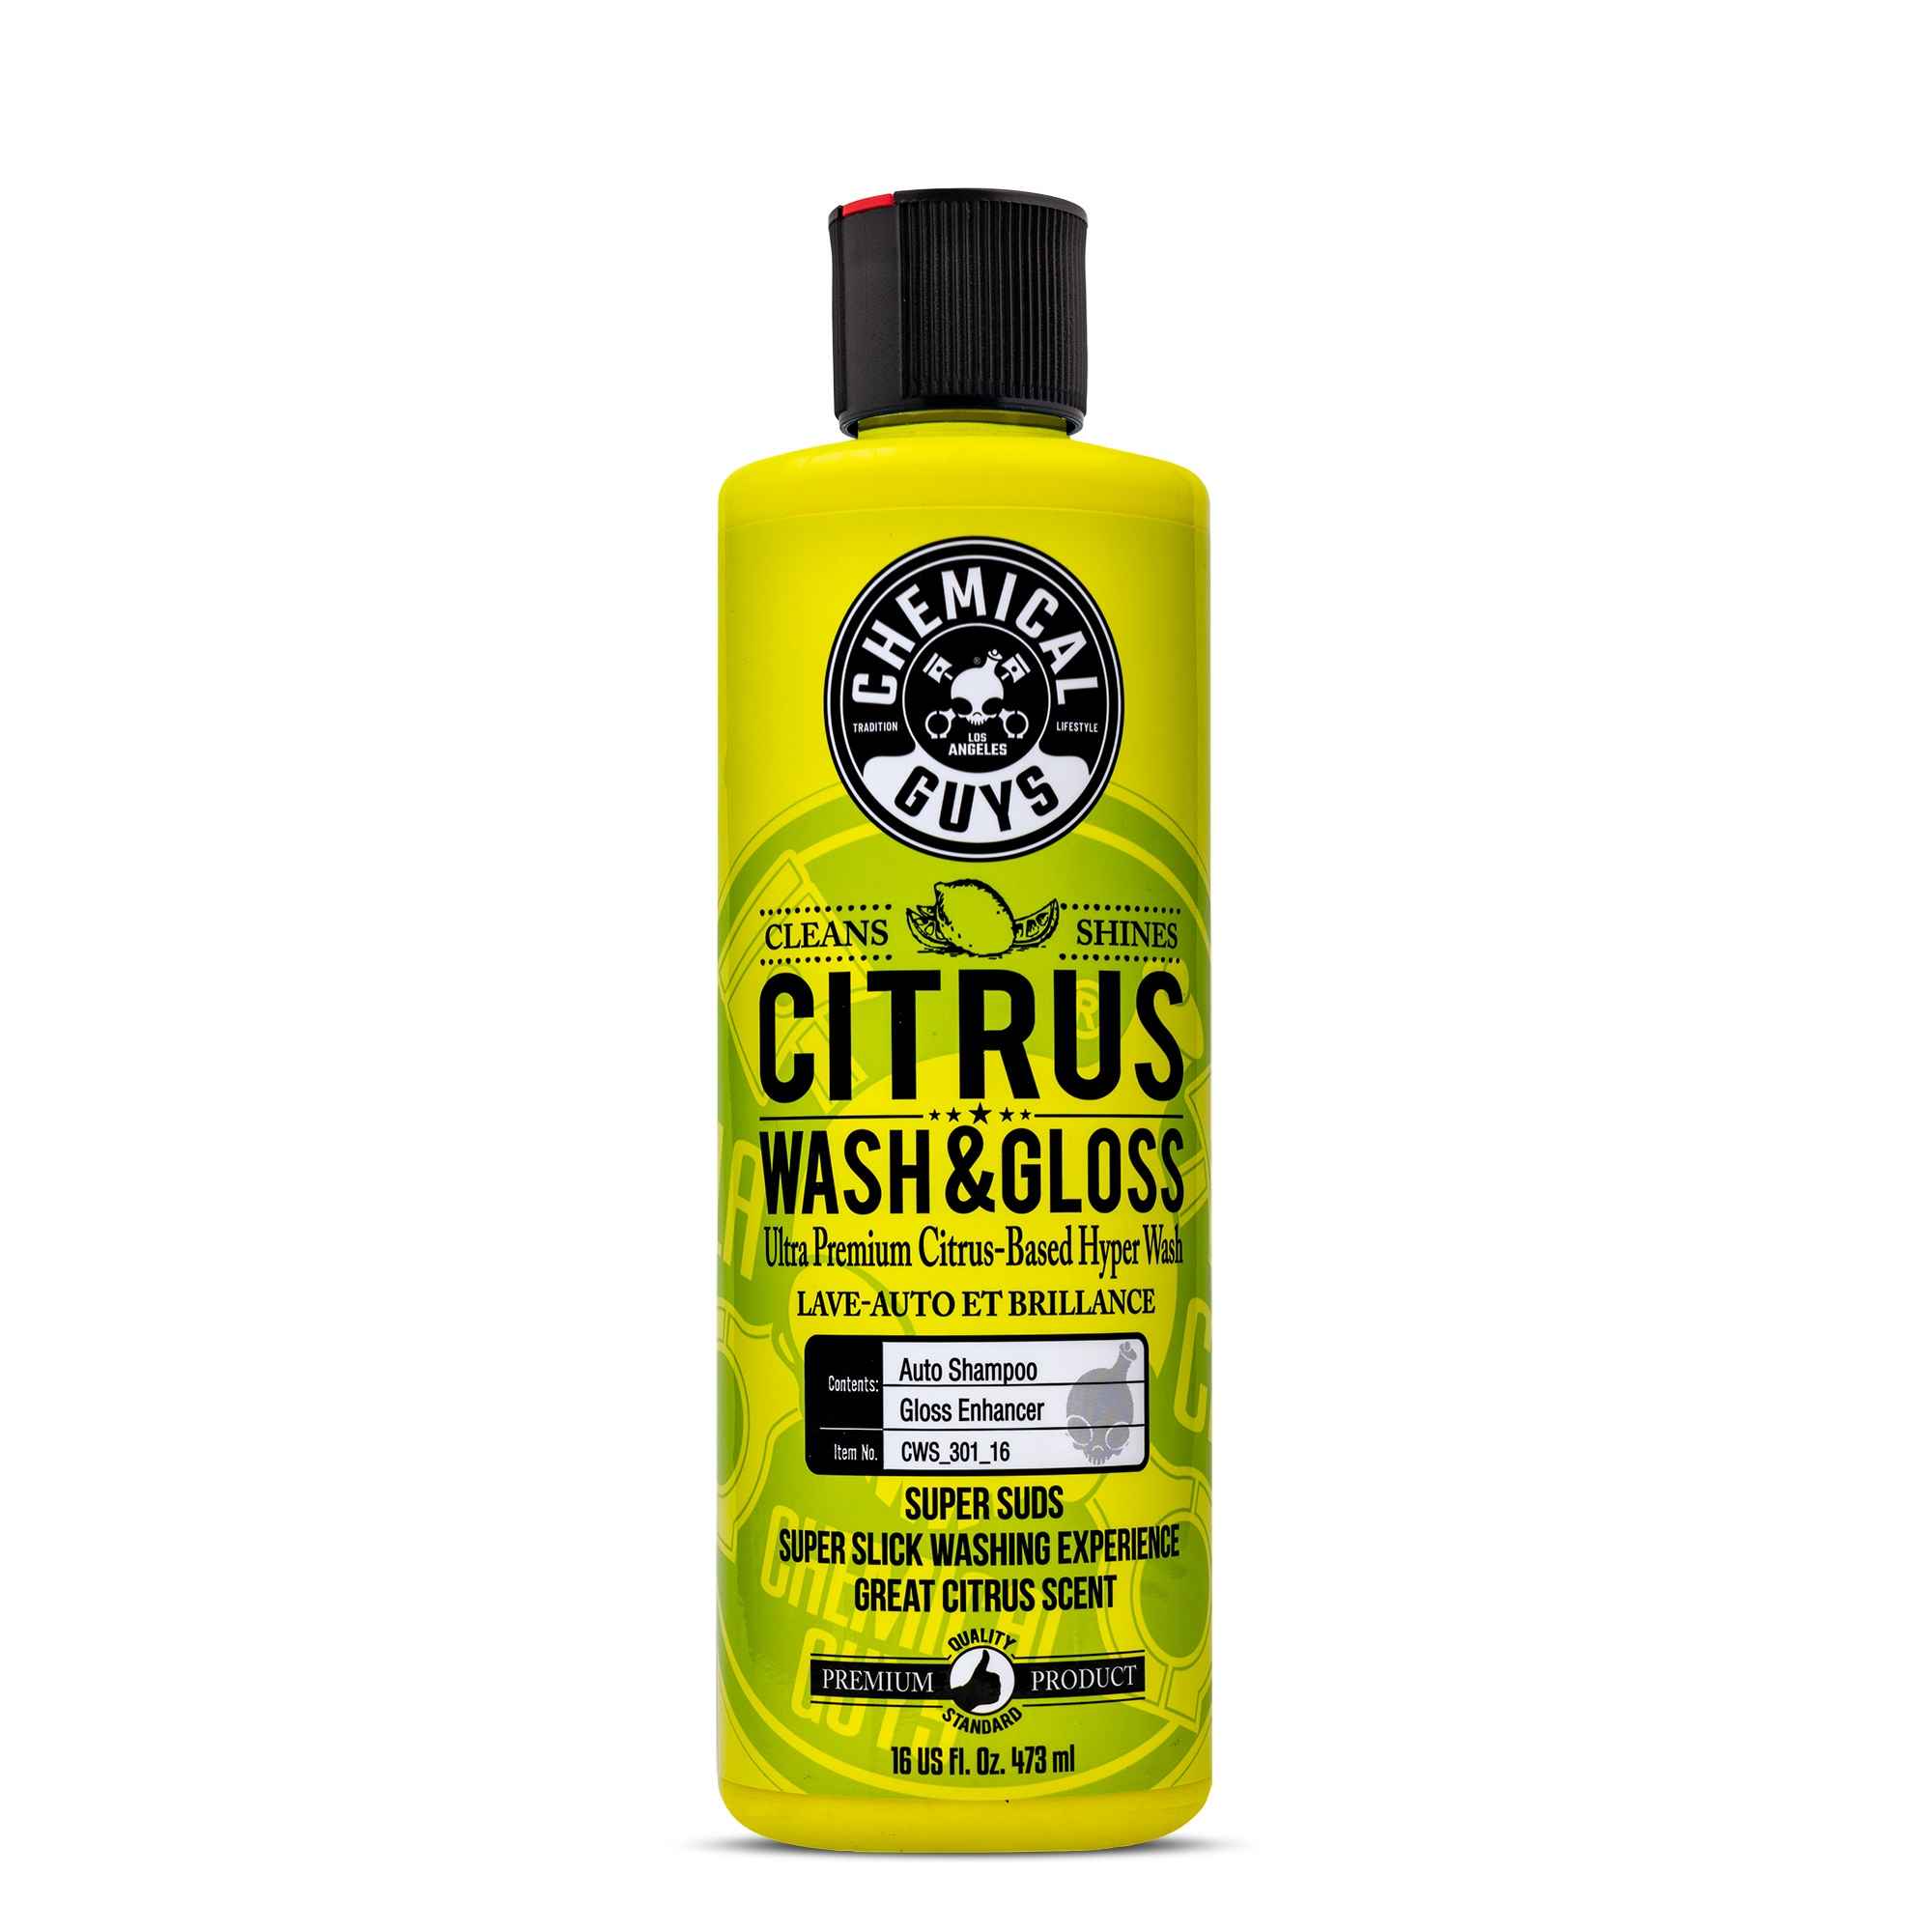 OEM 2021 Chrysler Chemical Citrus Wash And Gloss Concentrated Car Wash 16 Fl Oz (Part #68574396AA)